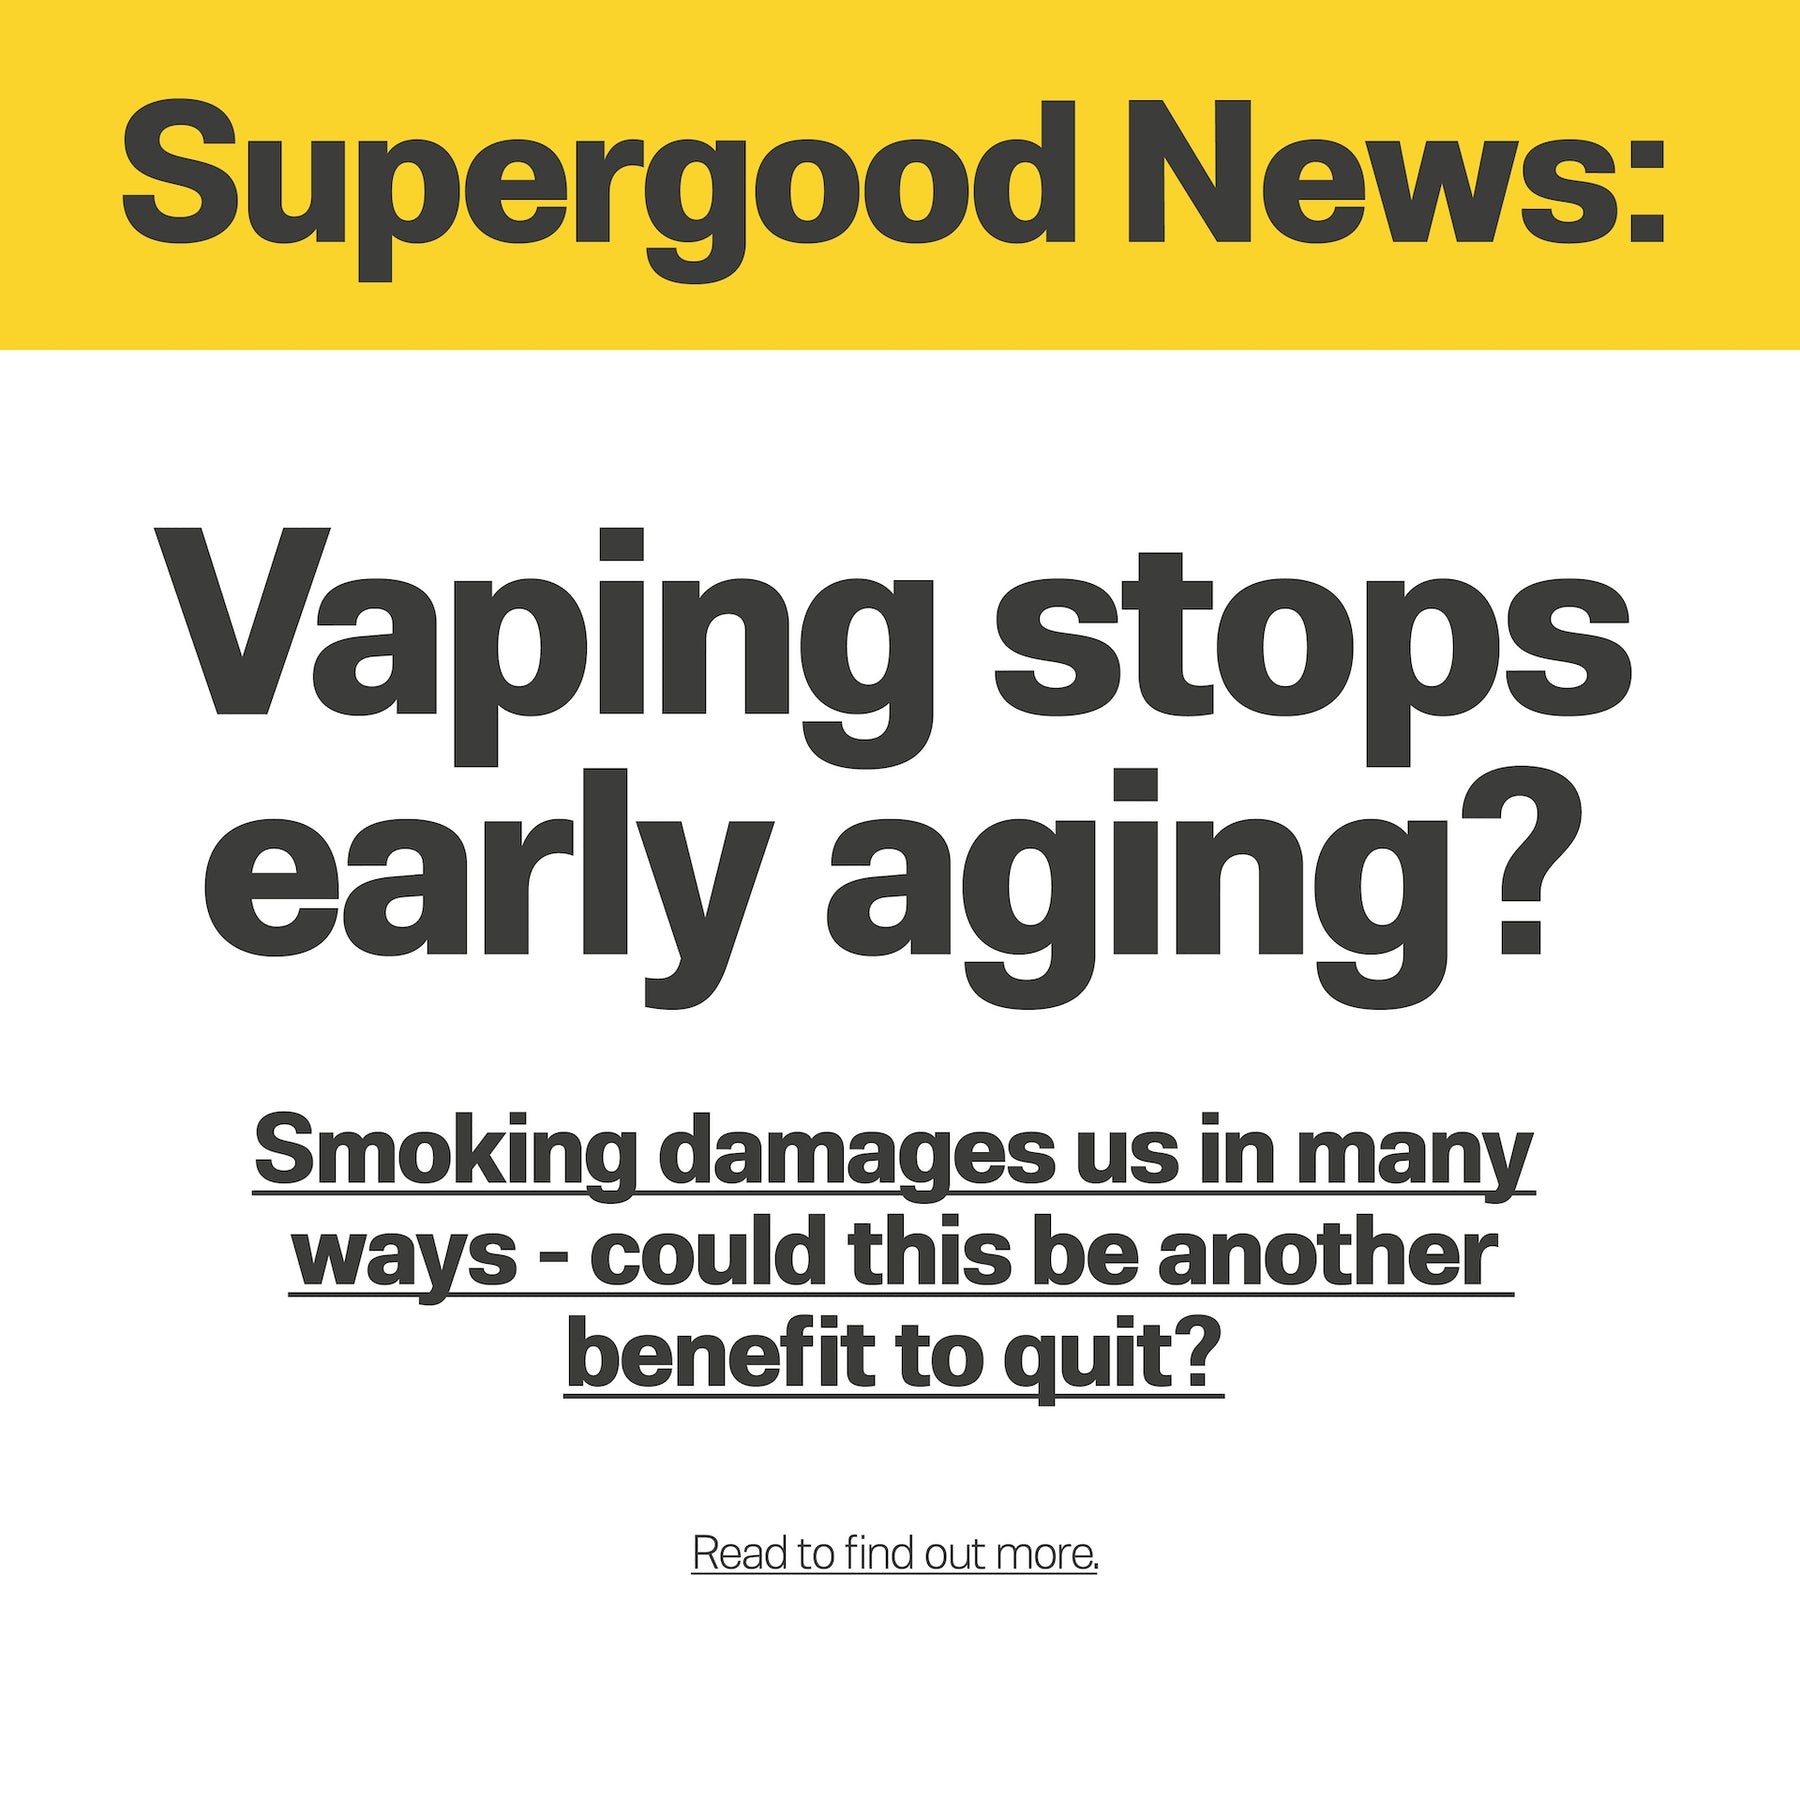 Vaping stops early ageing?